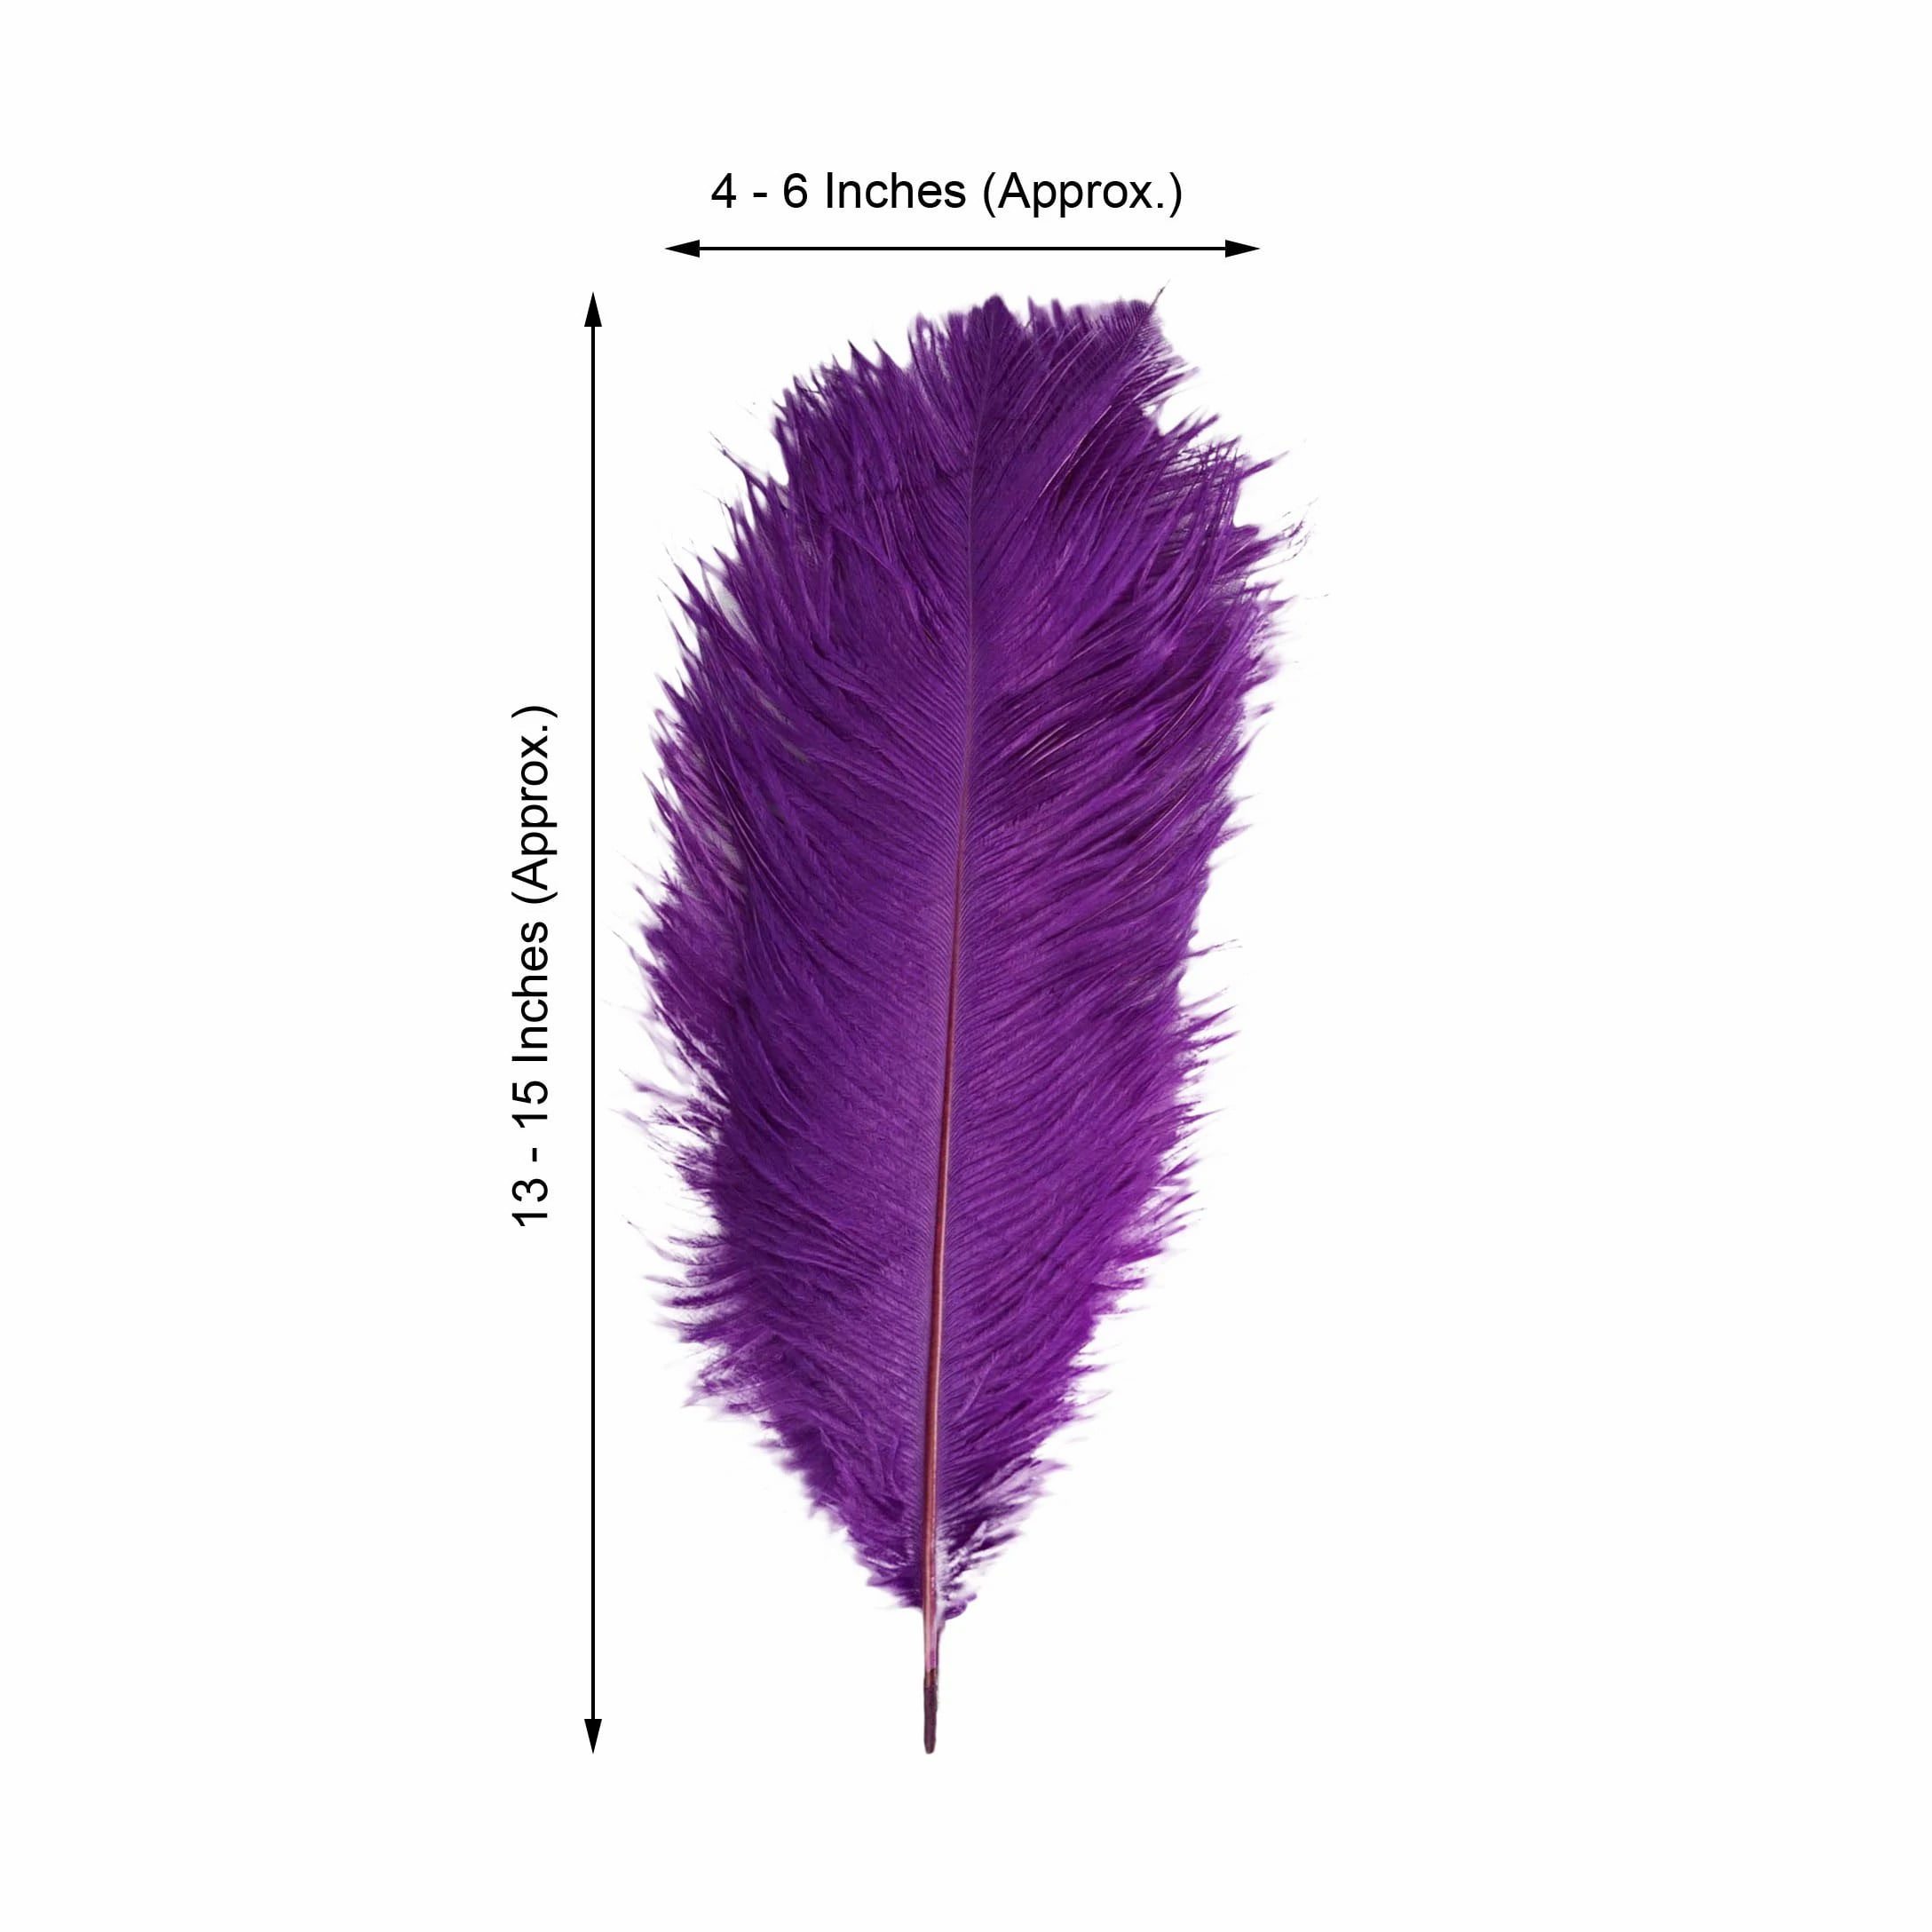 Sale!!! Purple Ostrich Feathers 12-14 inches 100 Pieces